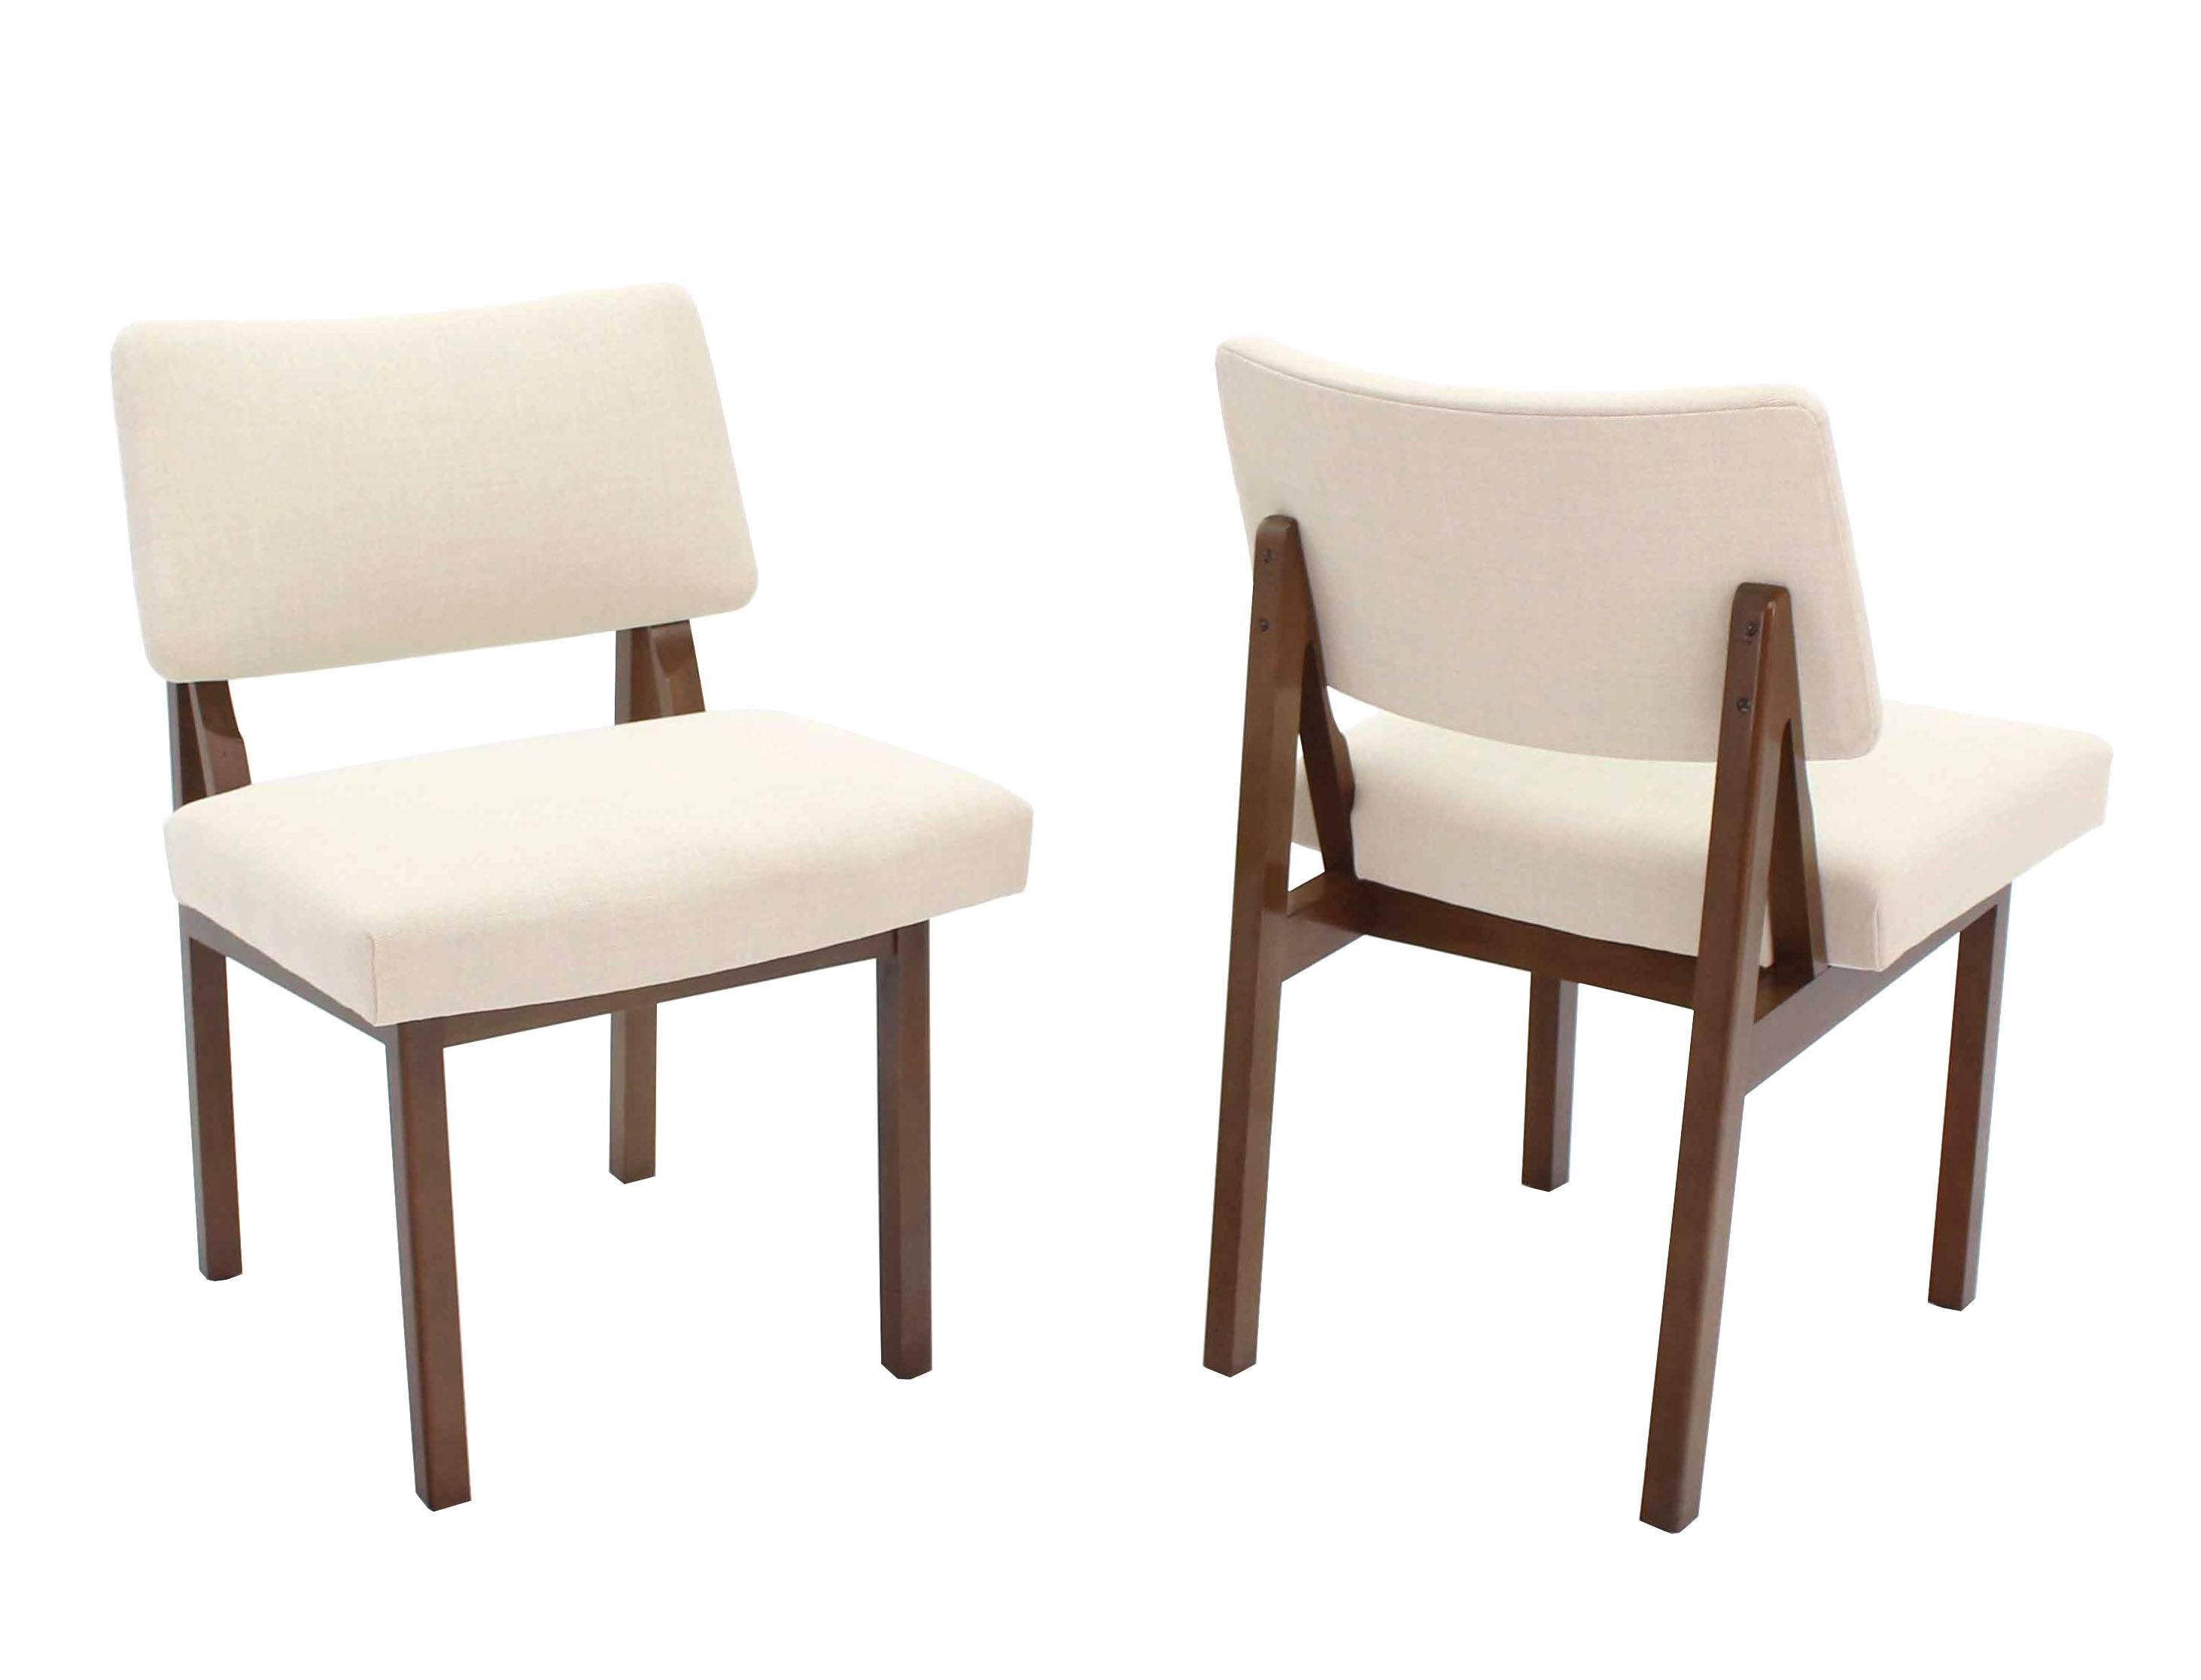 Nice set of four Mid-Century Modern chairs in style of Harvey Probber.